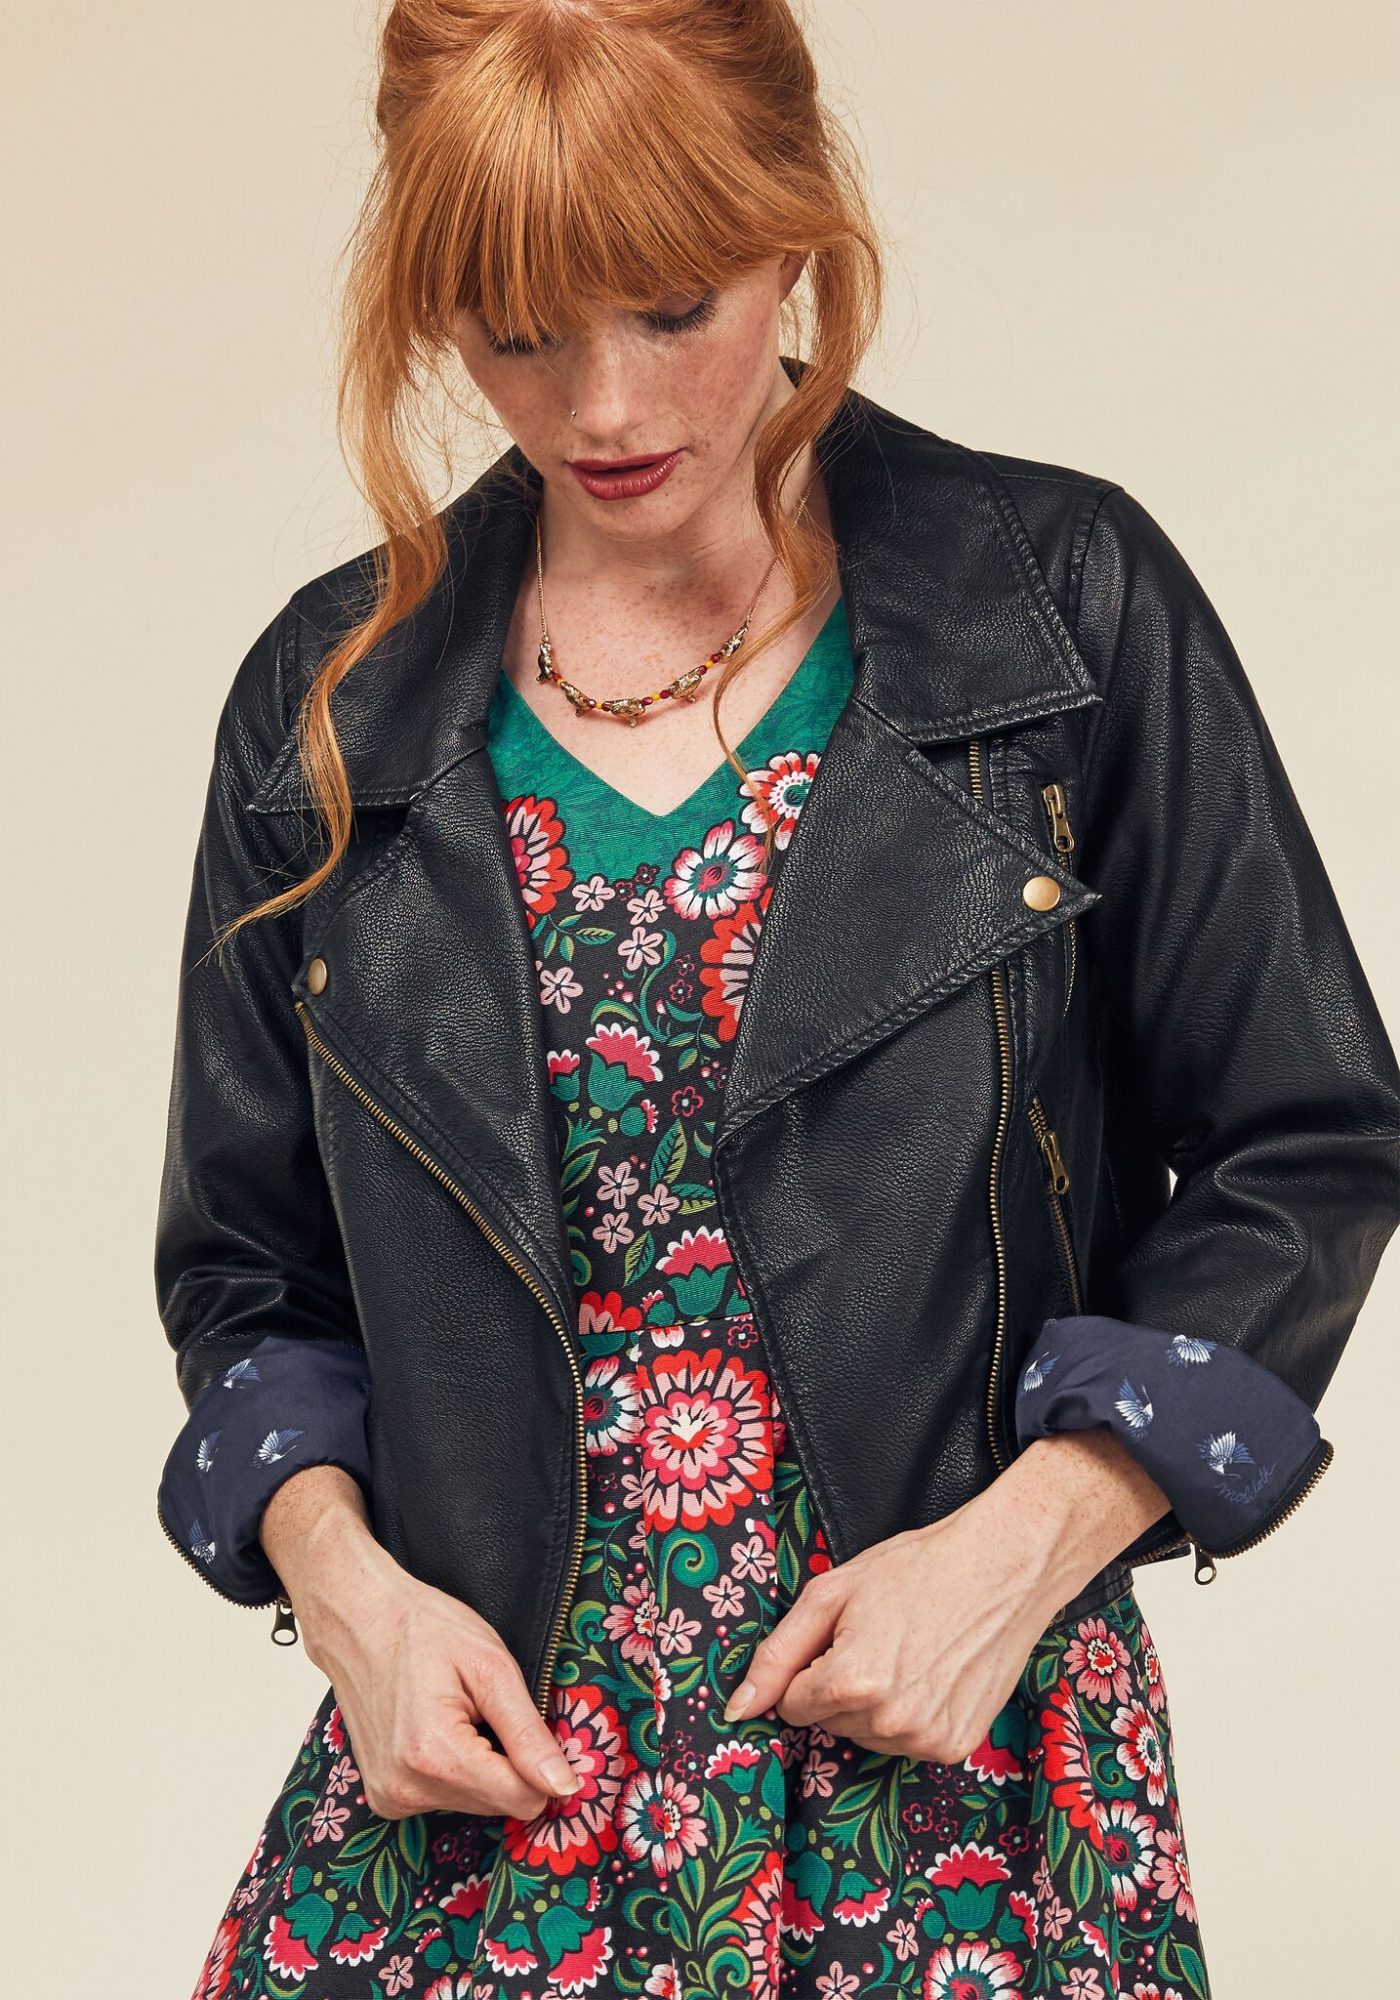 picture-of-modcloth-jacket-photo.jpg